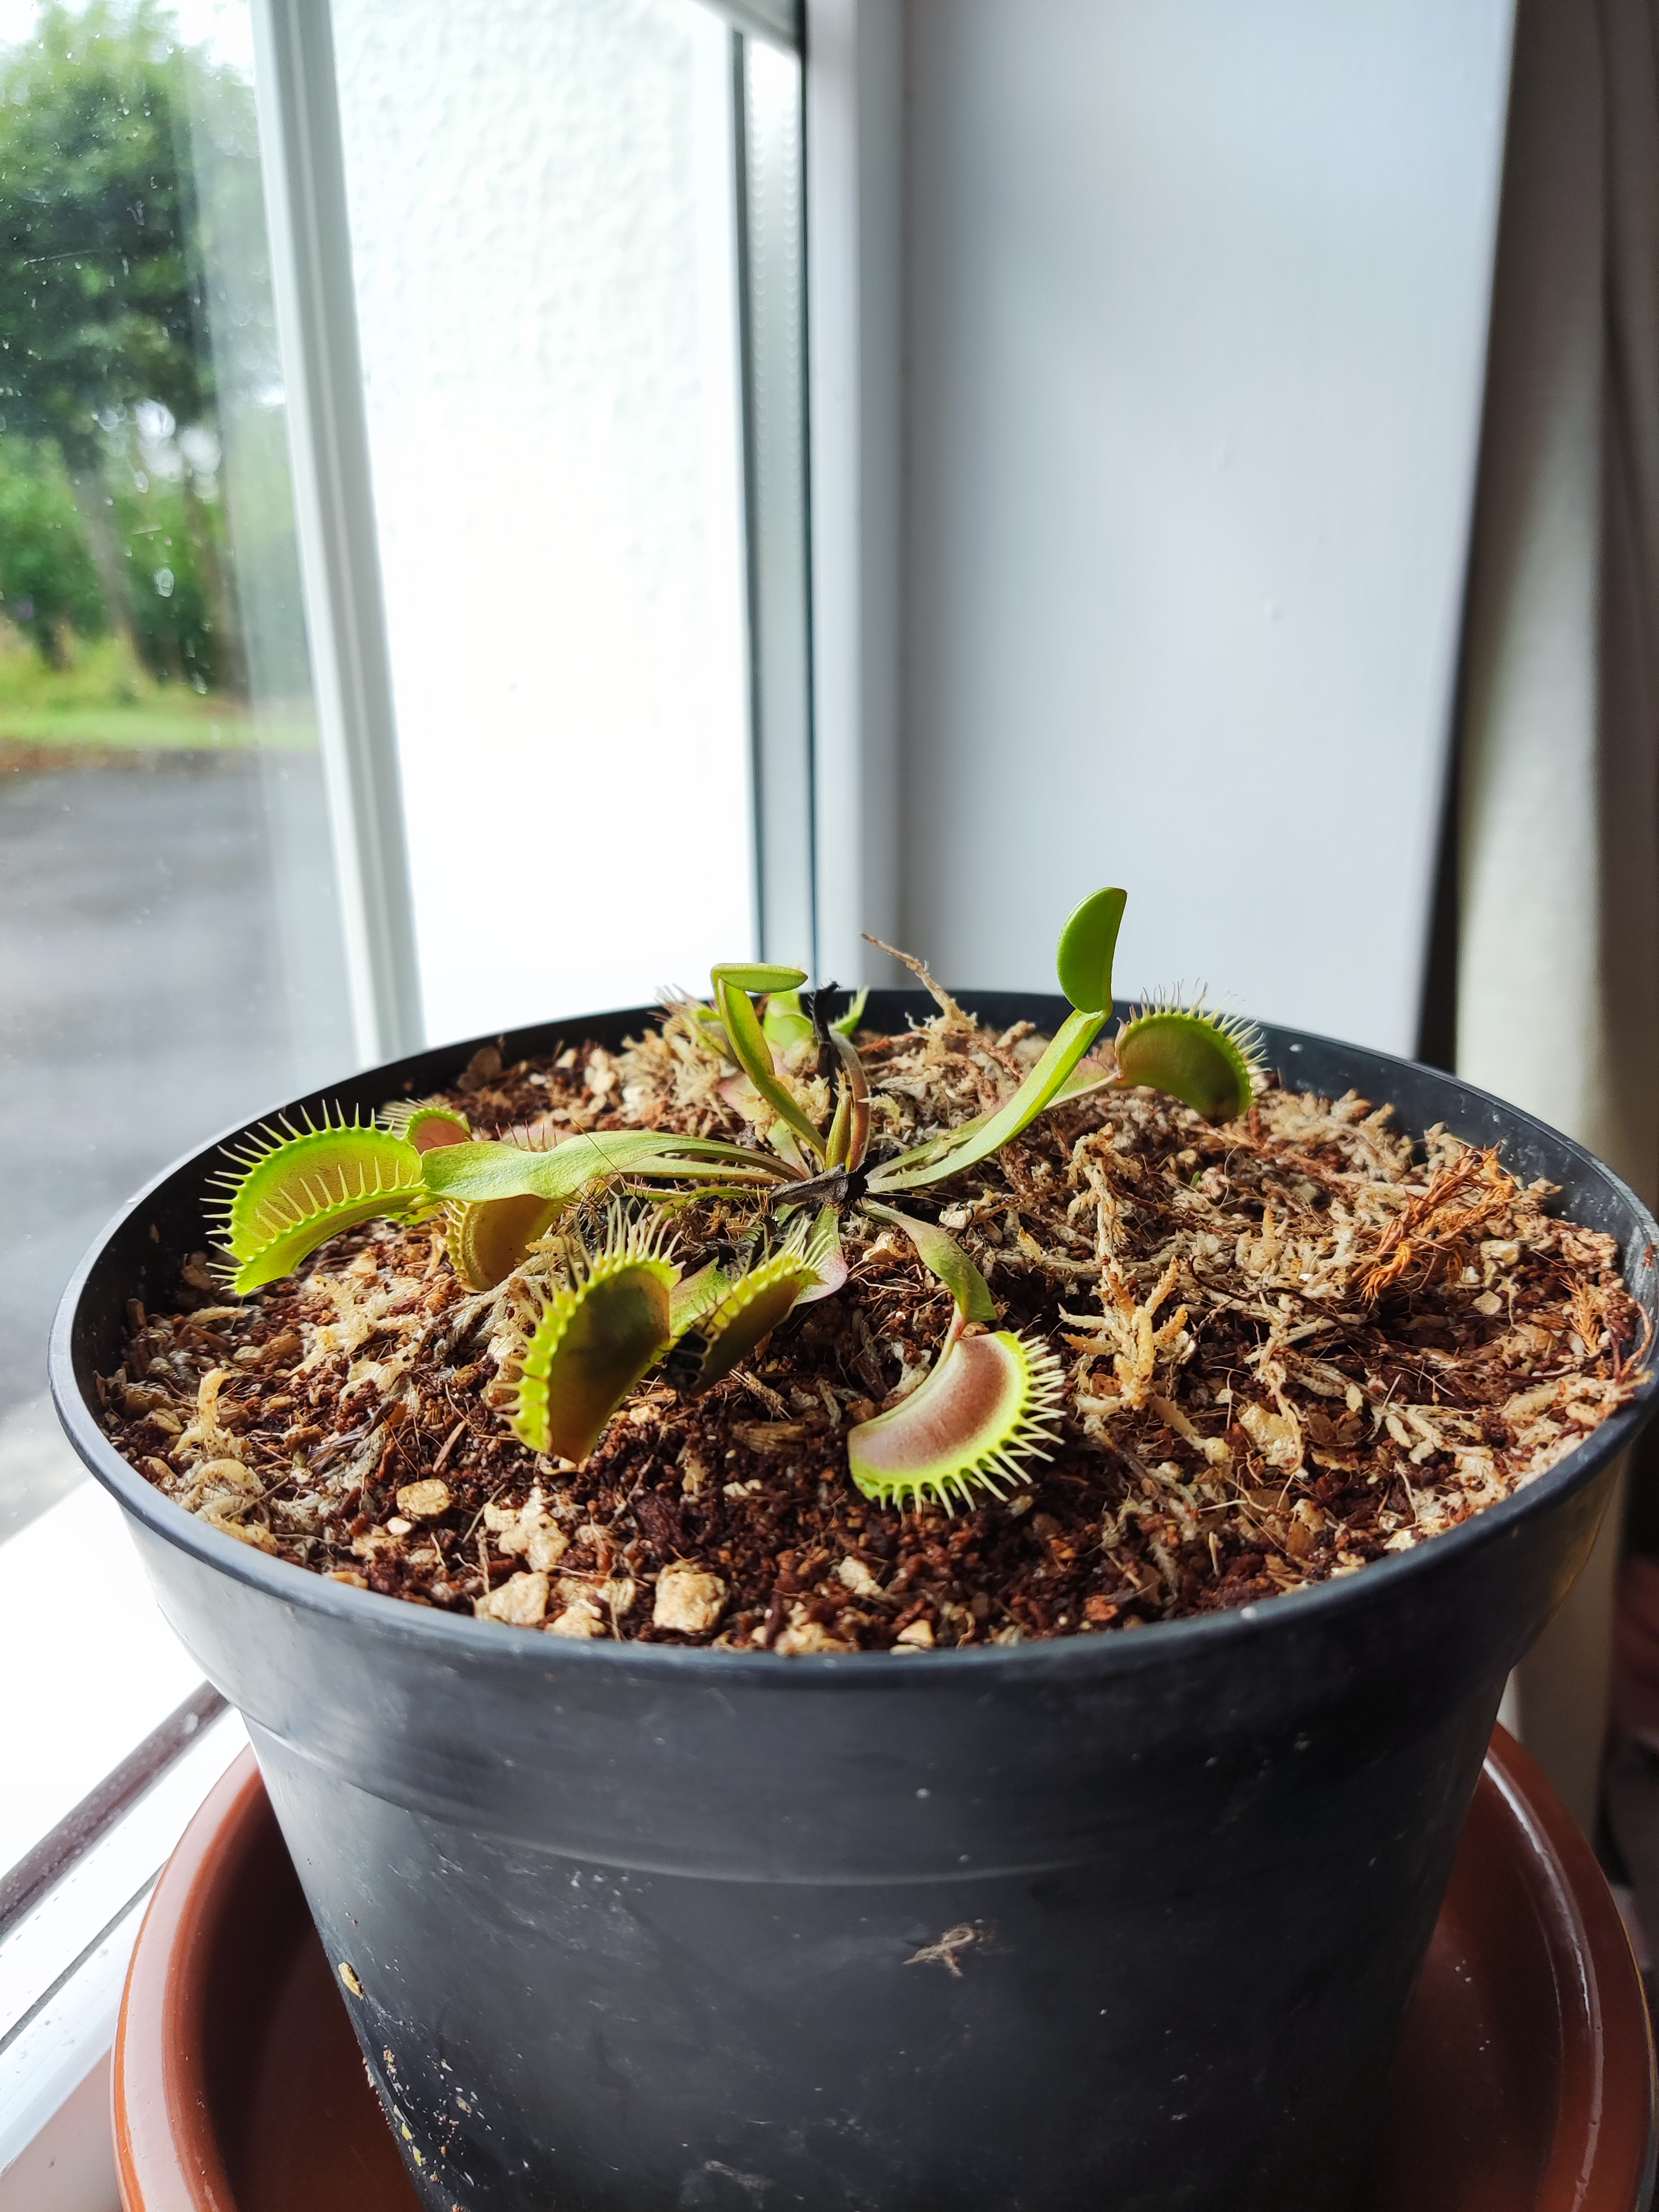 Potted venus flytrap on a window sill